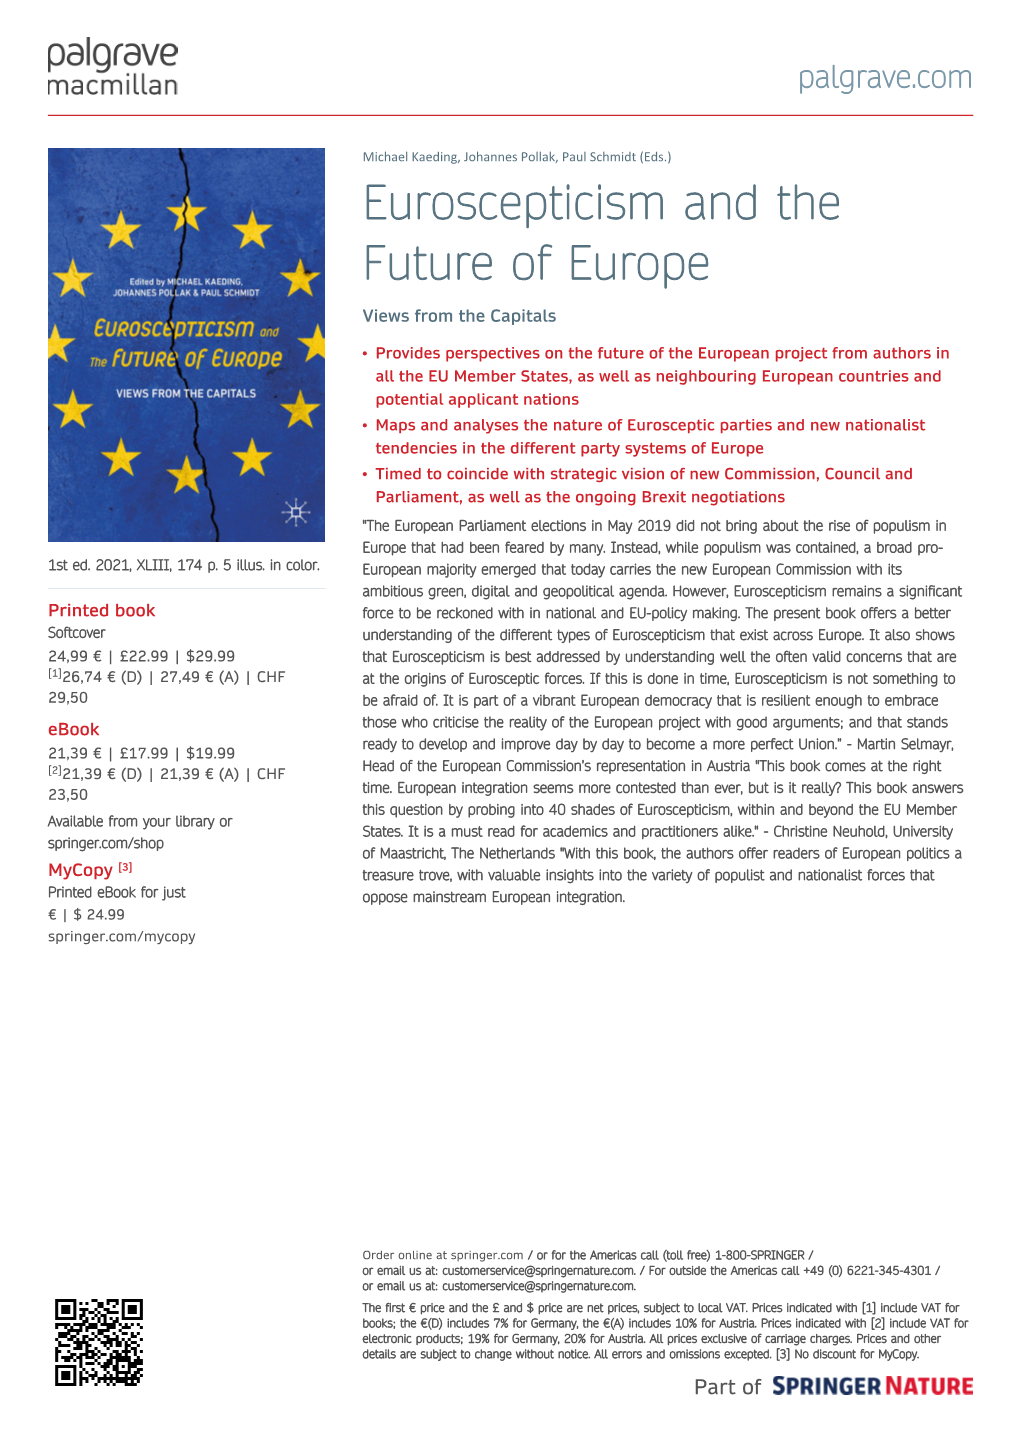 Euroscepticism and the Future of Europe Views from the Capitals